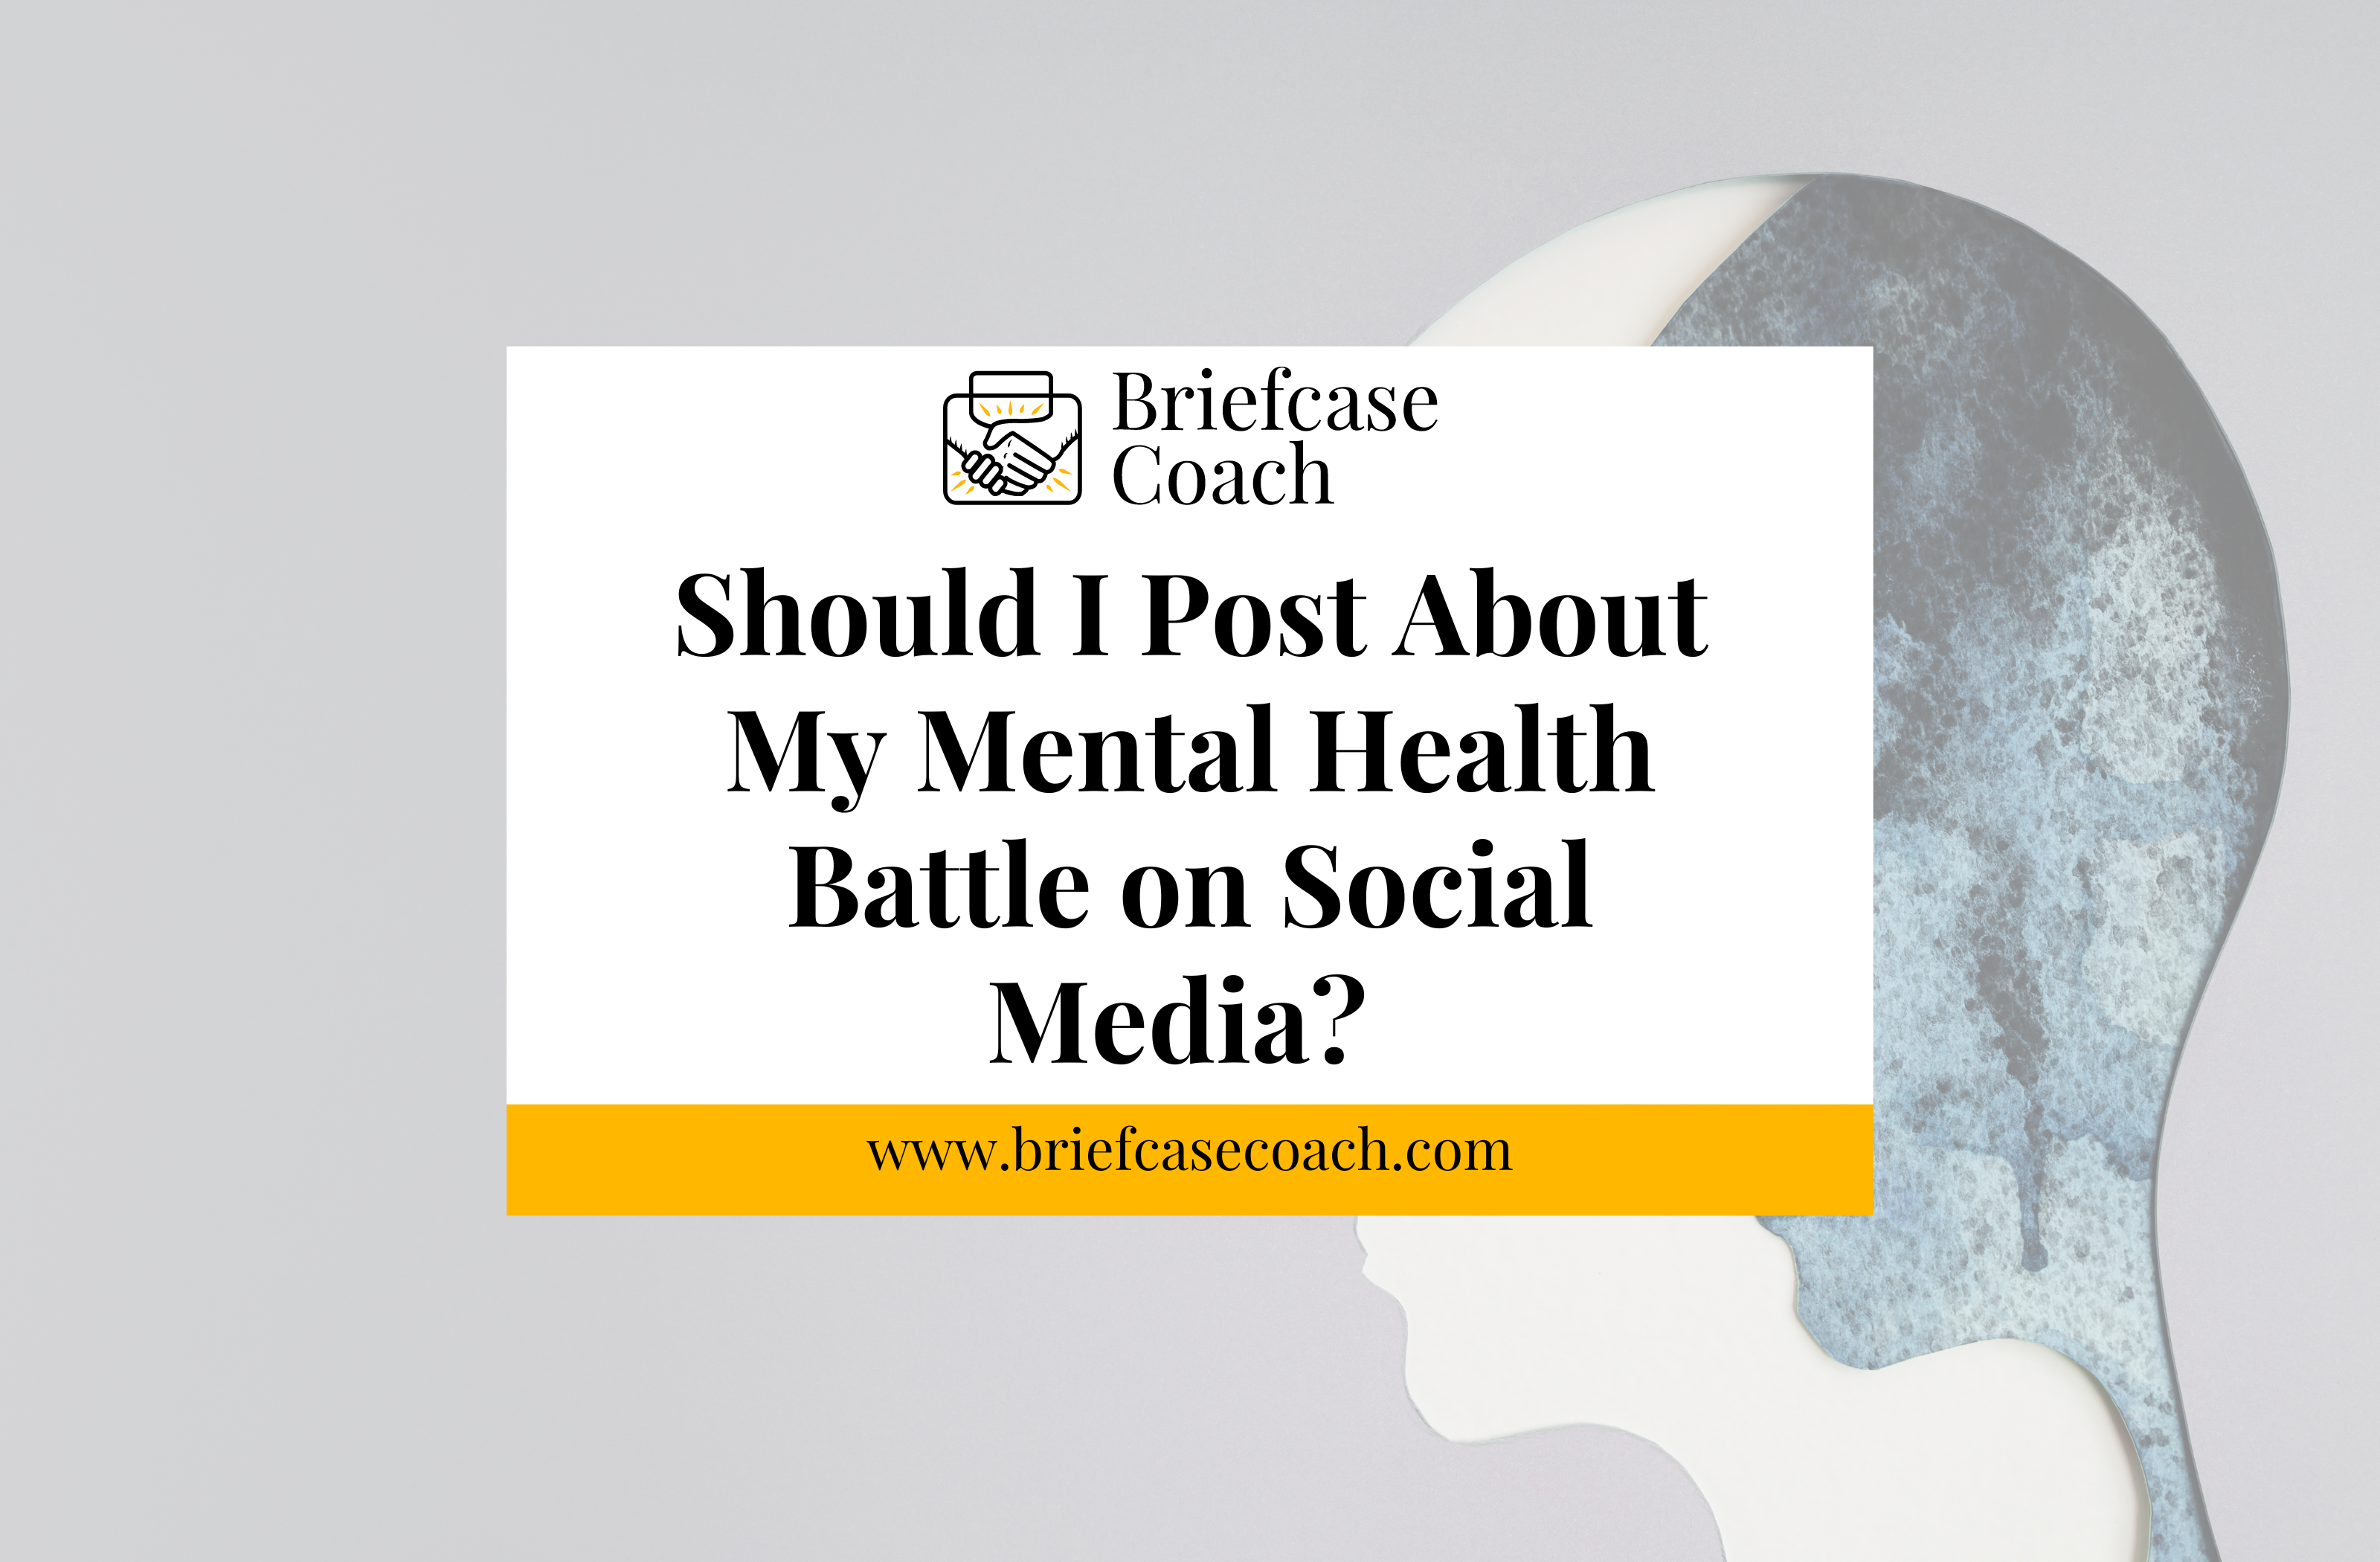 Should I Post About My Mental Health Battle on Social Media?